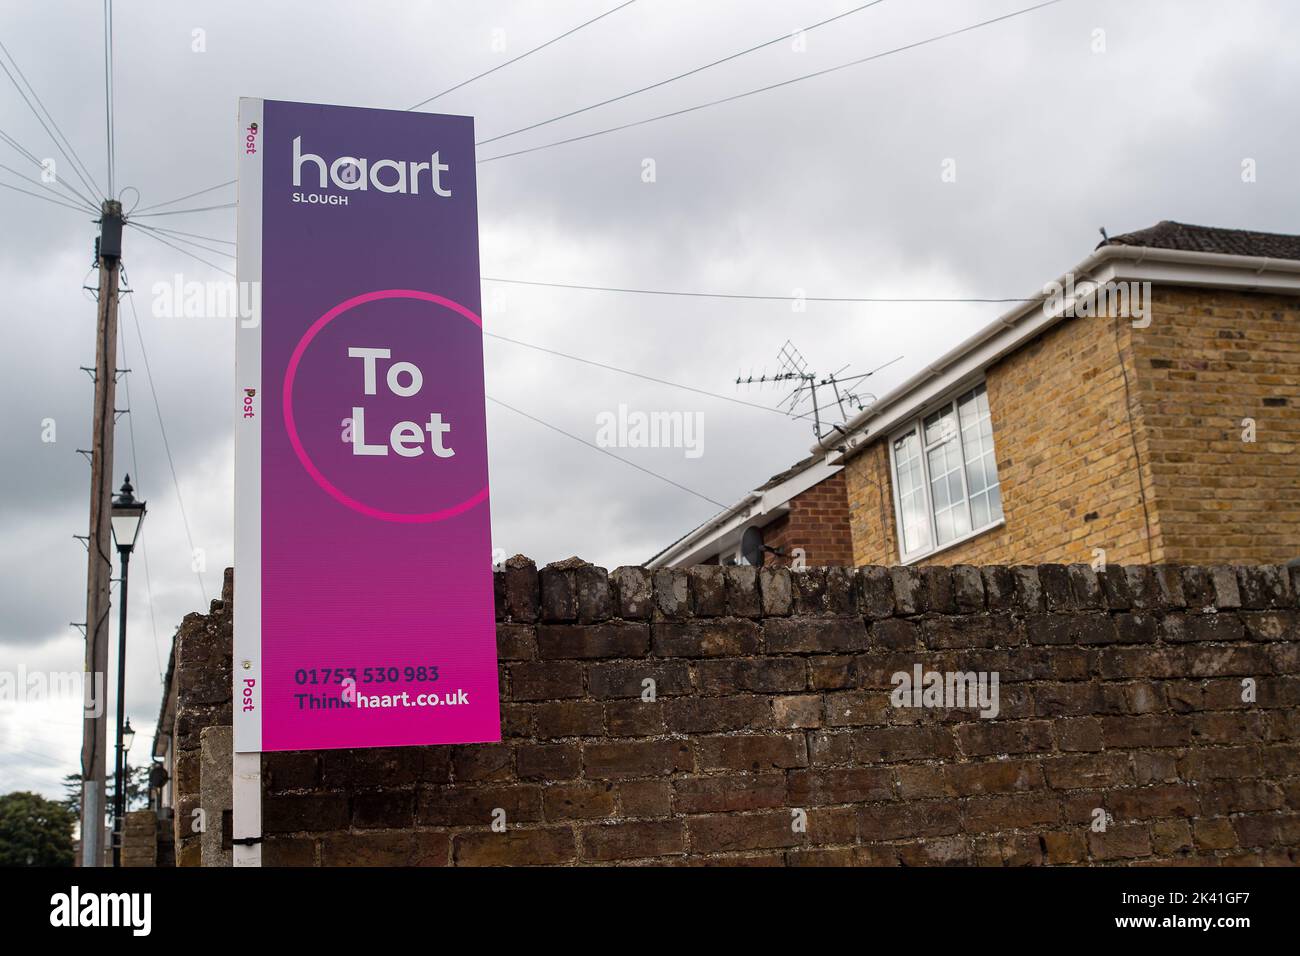 Slough, Berkshire, UK. 29th September, 2022. A to let sign outside a house  in Slough town centre. Following the mini-budget announced last week by the Chancellor, Kwasi Kwarteng, according to Moneyfacts, 40% of mortgage deals are now reported to have been withdrawn from the market. Property prices are now predicted to fall whilst mortgage rates increase. Credit: Maureen McLean/Alamy Live News Stock Photo